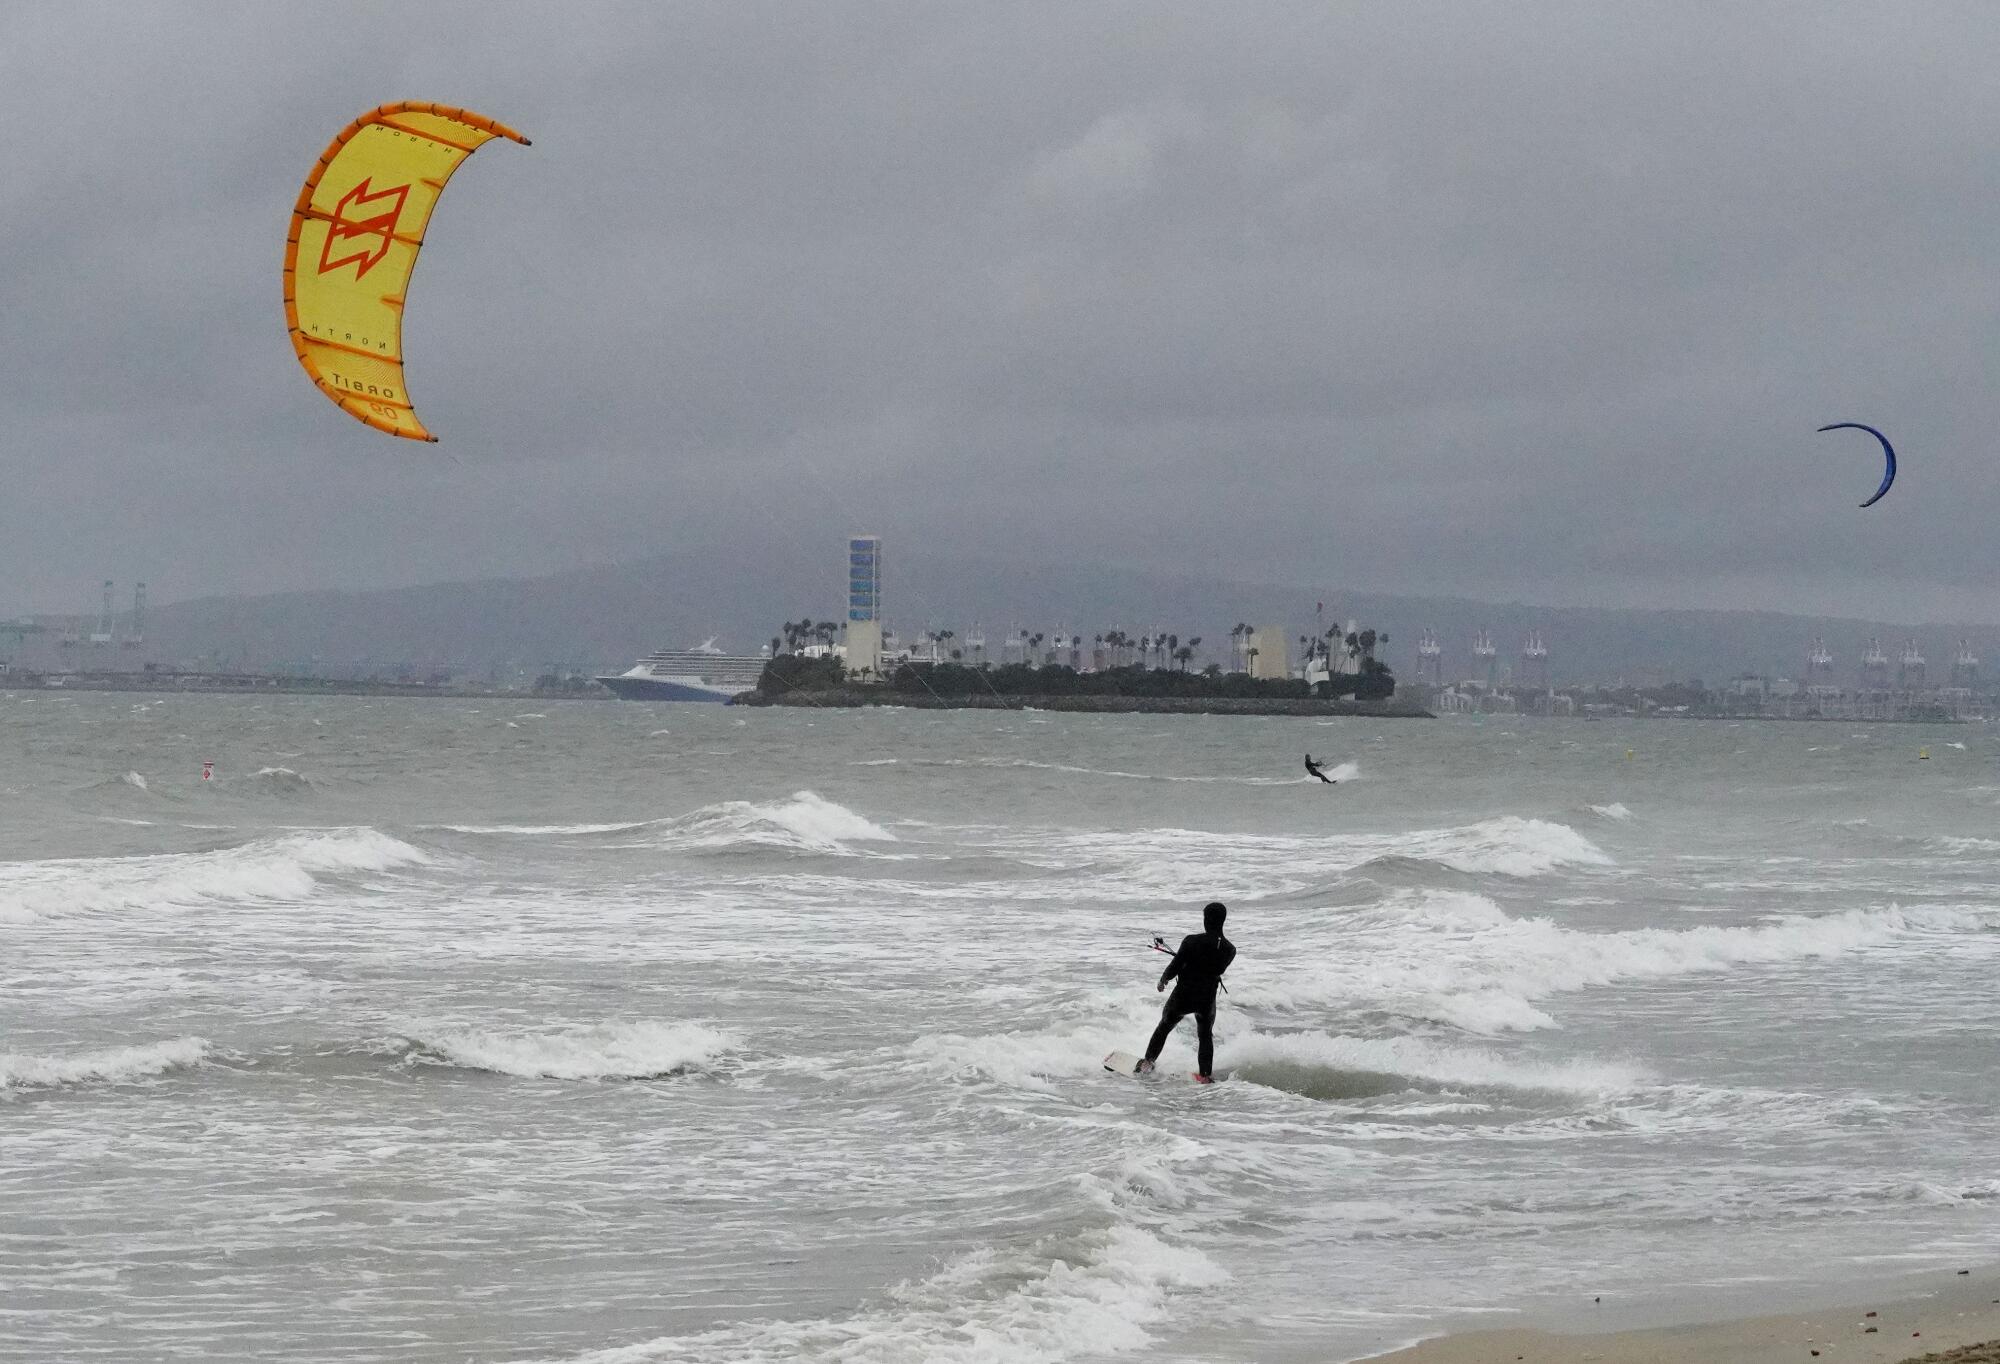 A kitesurfer launches a yellow kite at Belmont Shore in Long Beach 